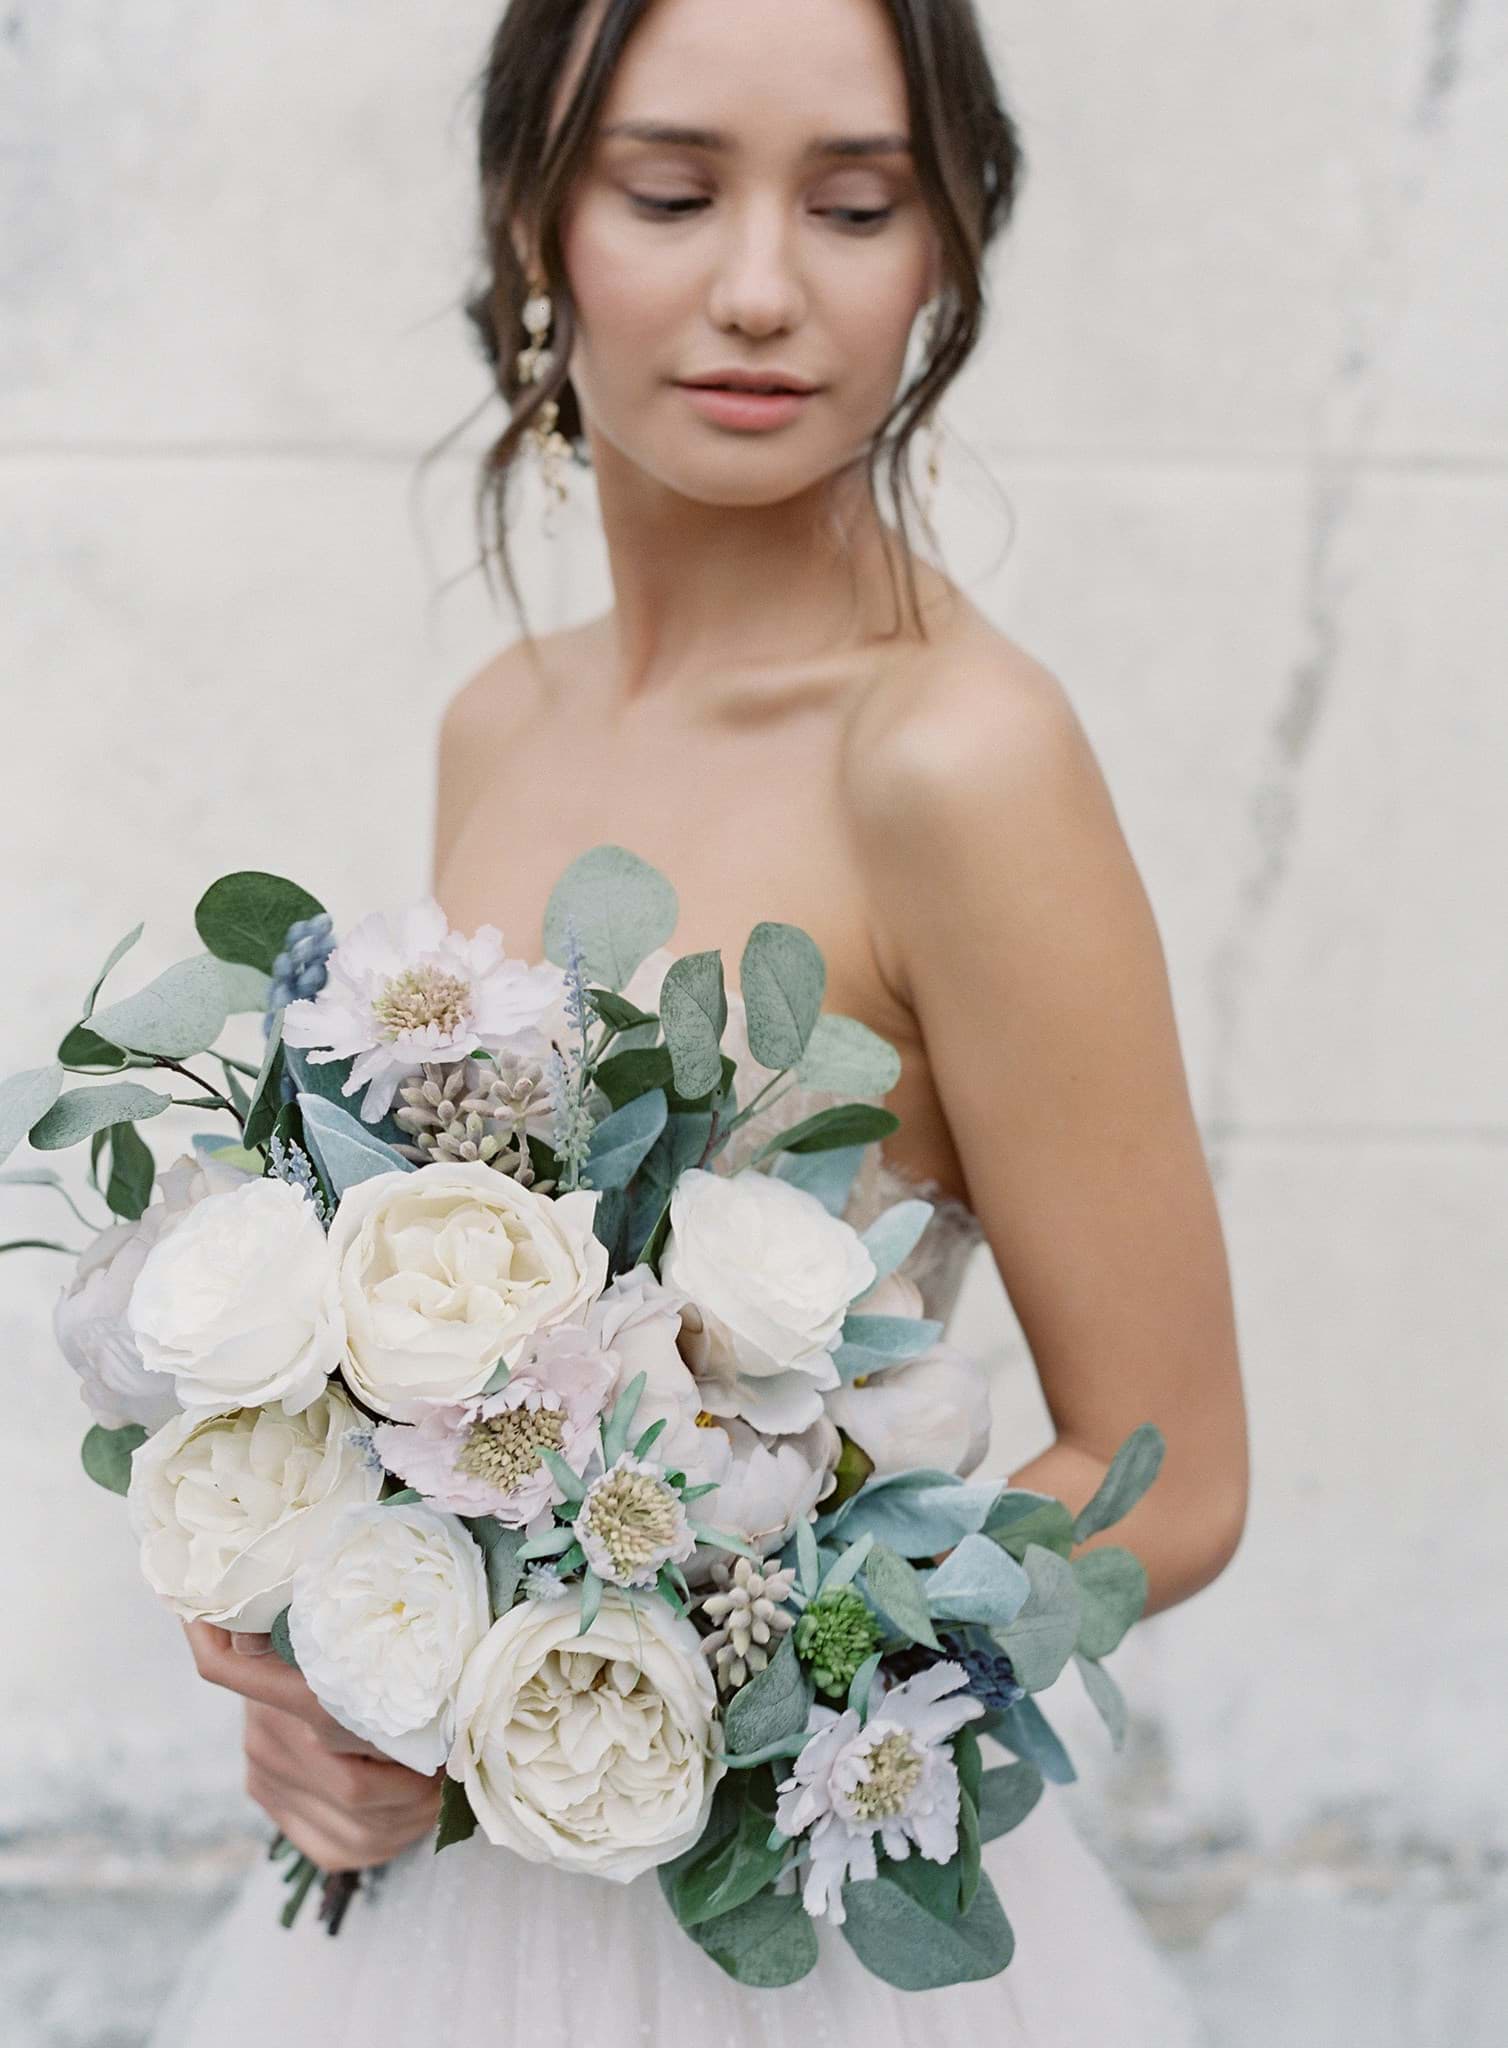 How To Make A Wedding Bouquet With Fake Flowers Afloral, 53% OFF